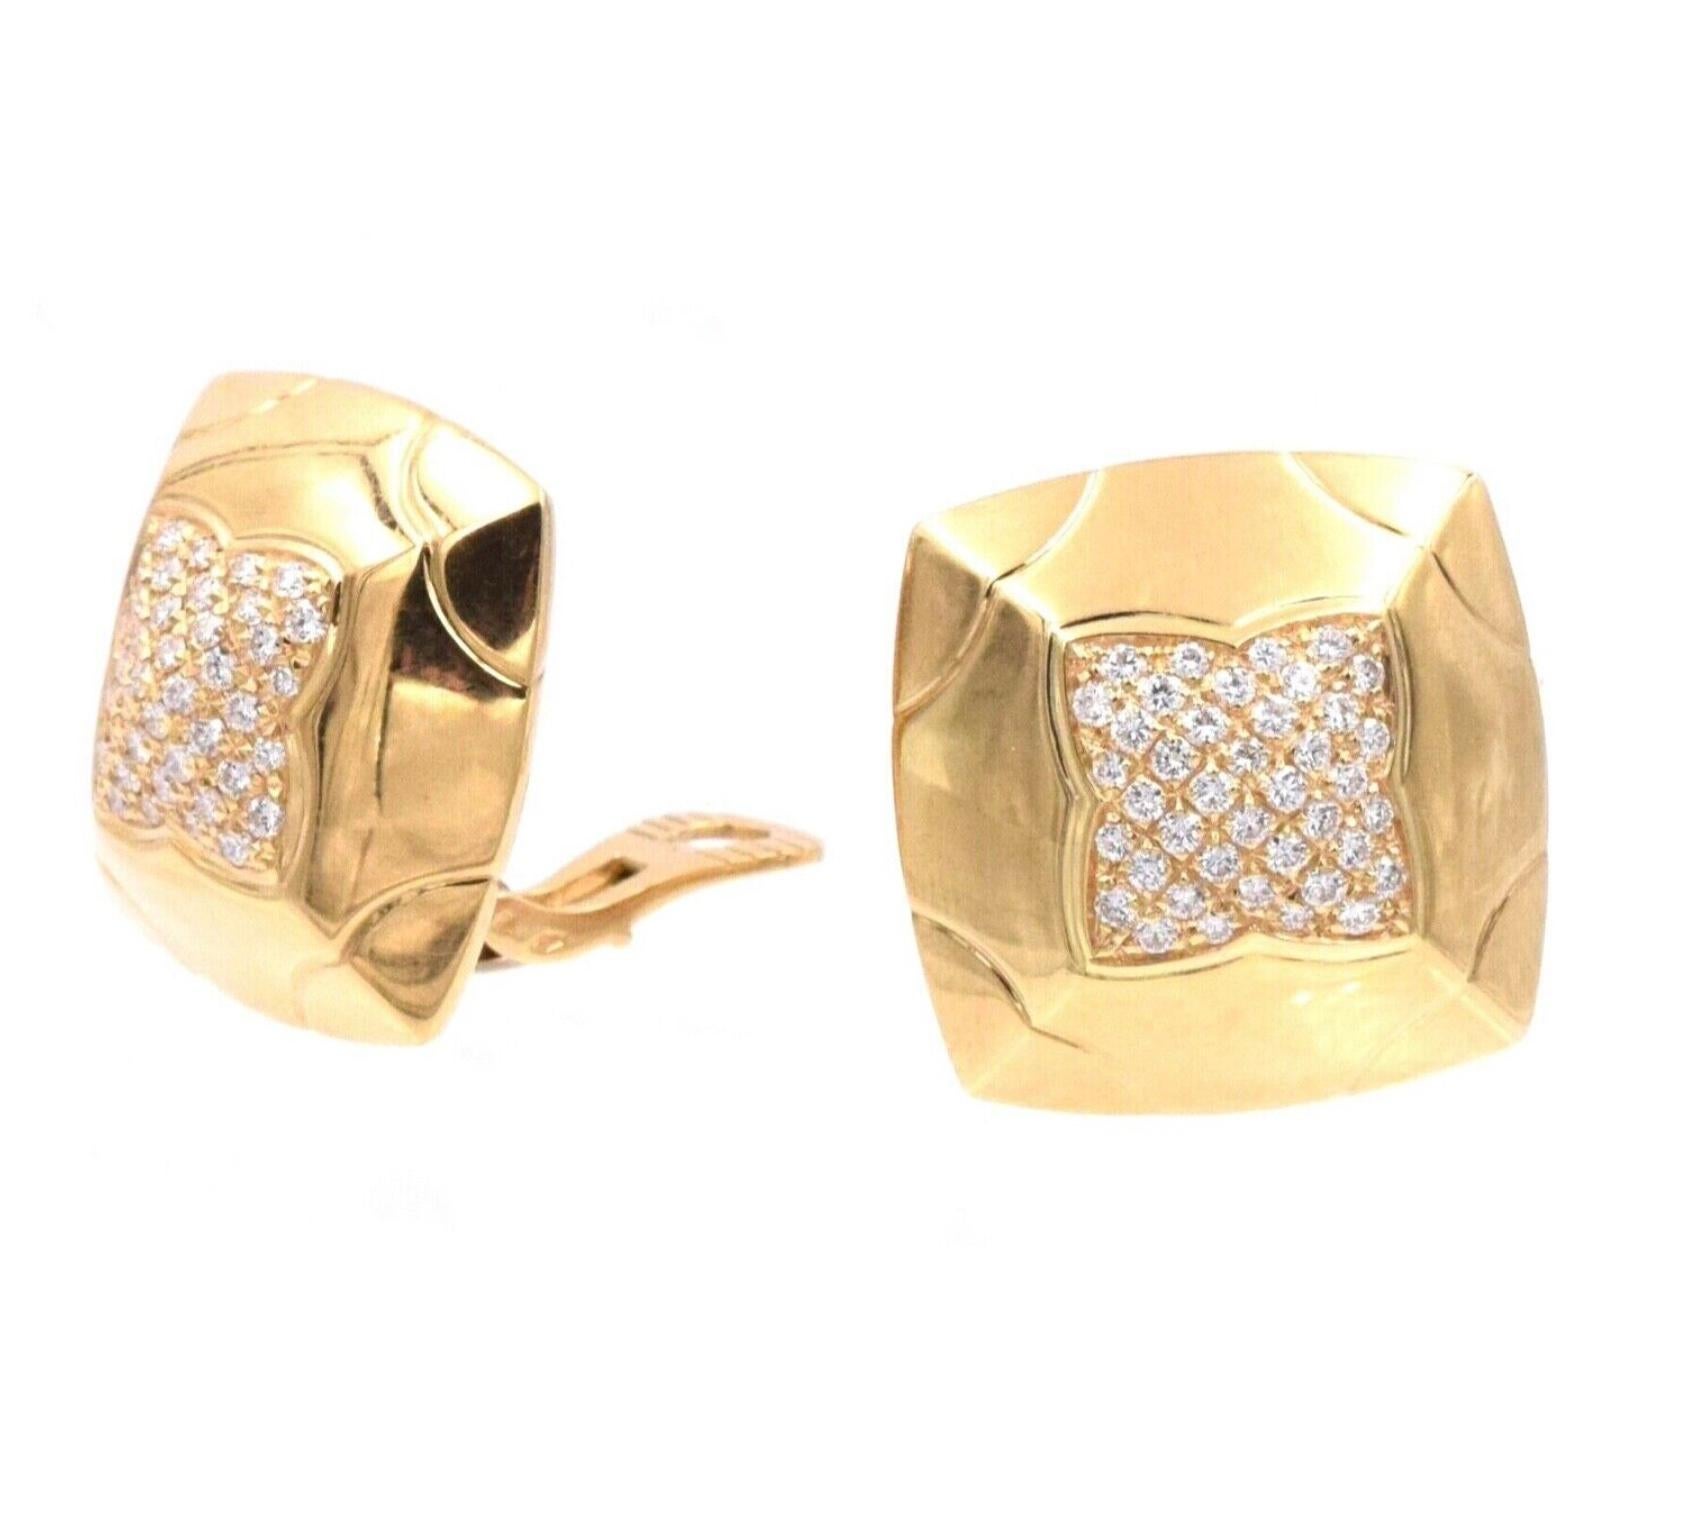 Bvlgari  Pyramid 18k Yellow Gold Diamond Earrings

Iconic Authentic Bvlgari Pyramid Earrings, Circa 1990, crafted in 18k yellow gold, with clip-on fastening. 

The centers adorn with pavé-set 80 round brilliant cut diamonds.

Each ear-clips signed